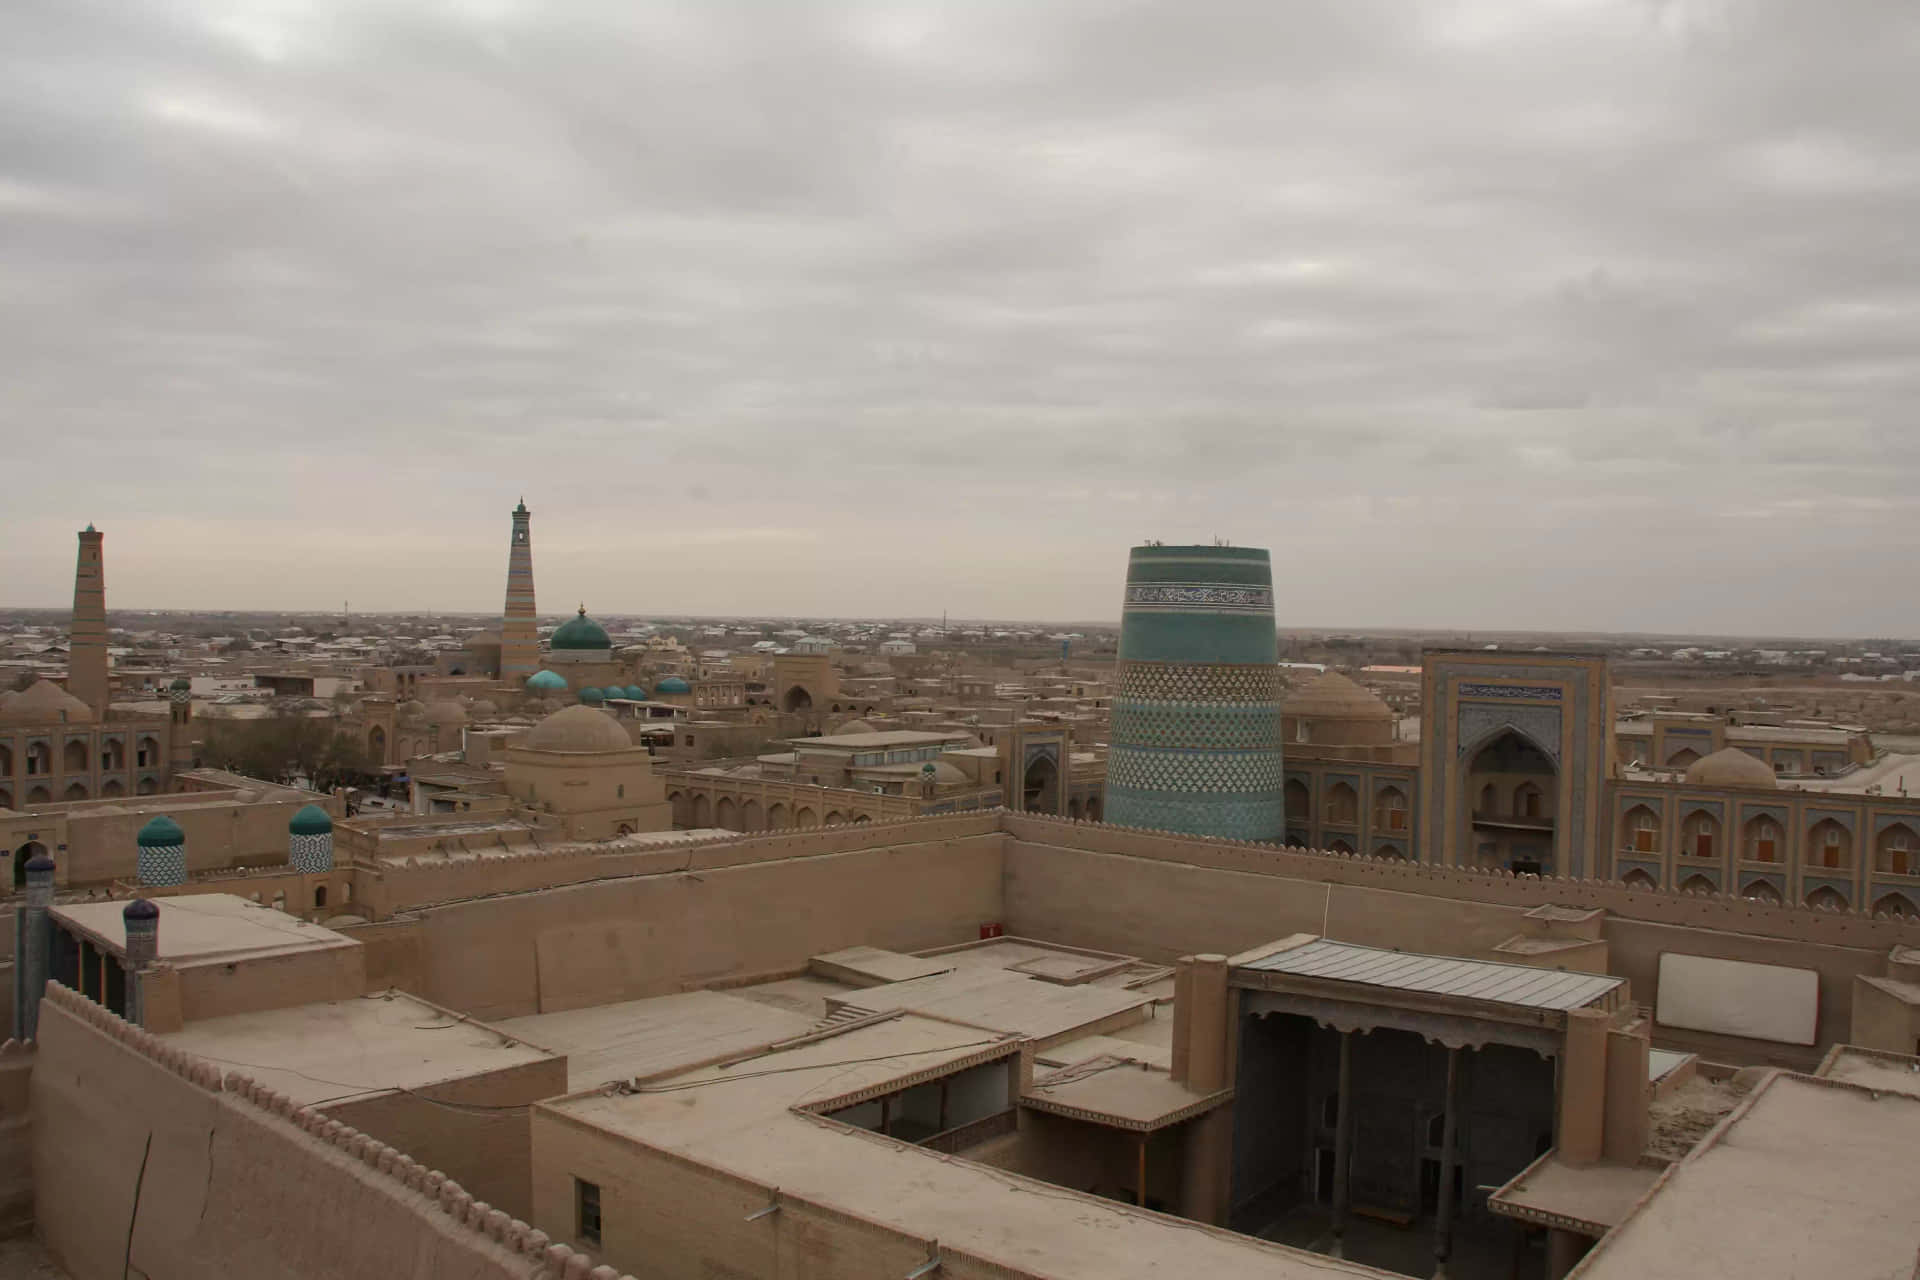 "Afternoon Sky Over Historical Khiva" Wallpaper